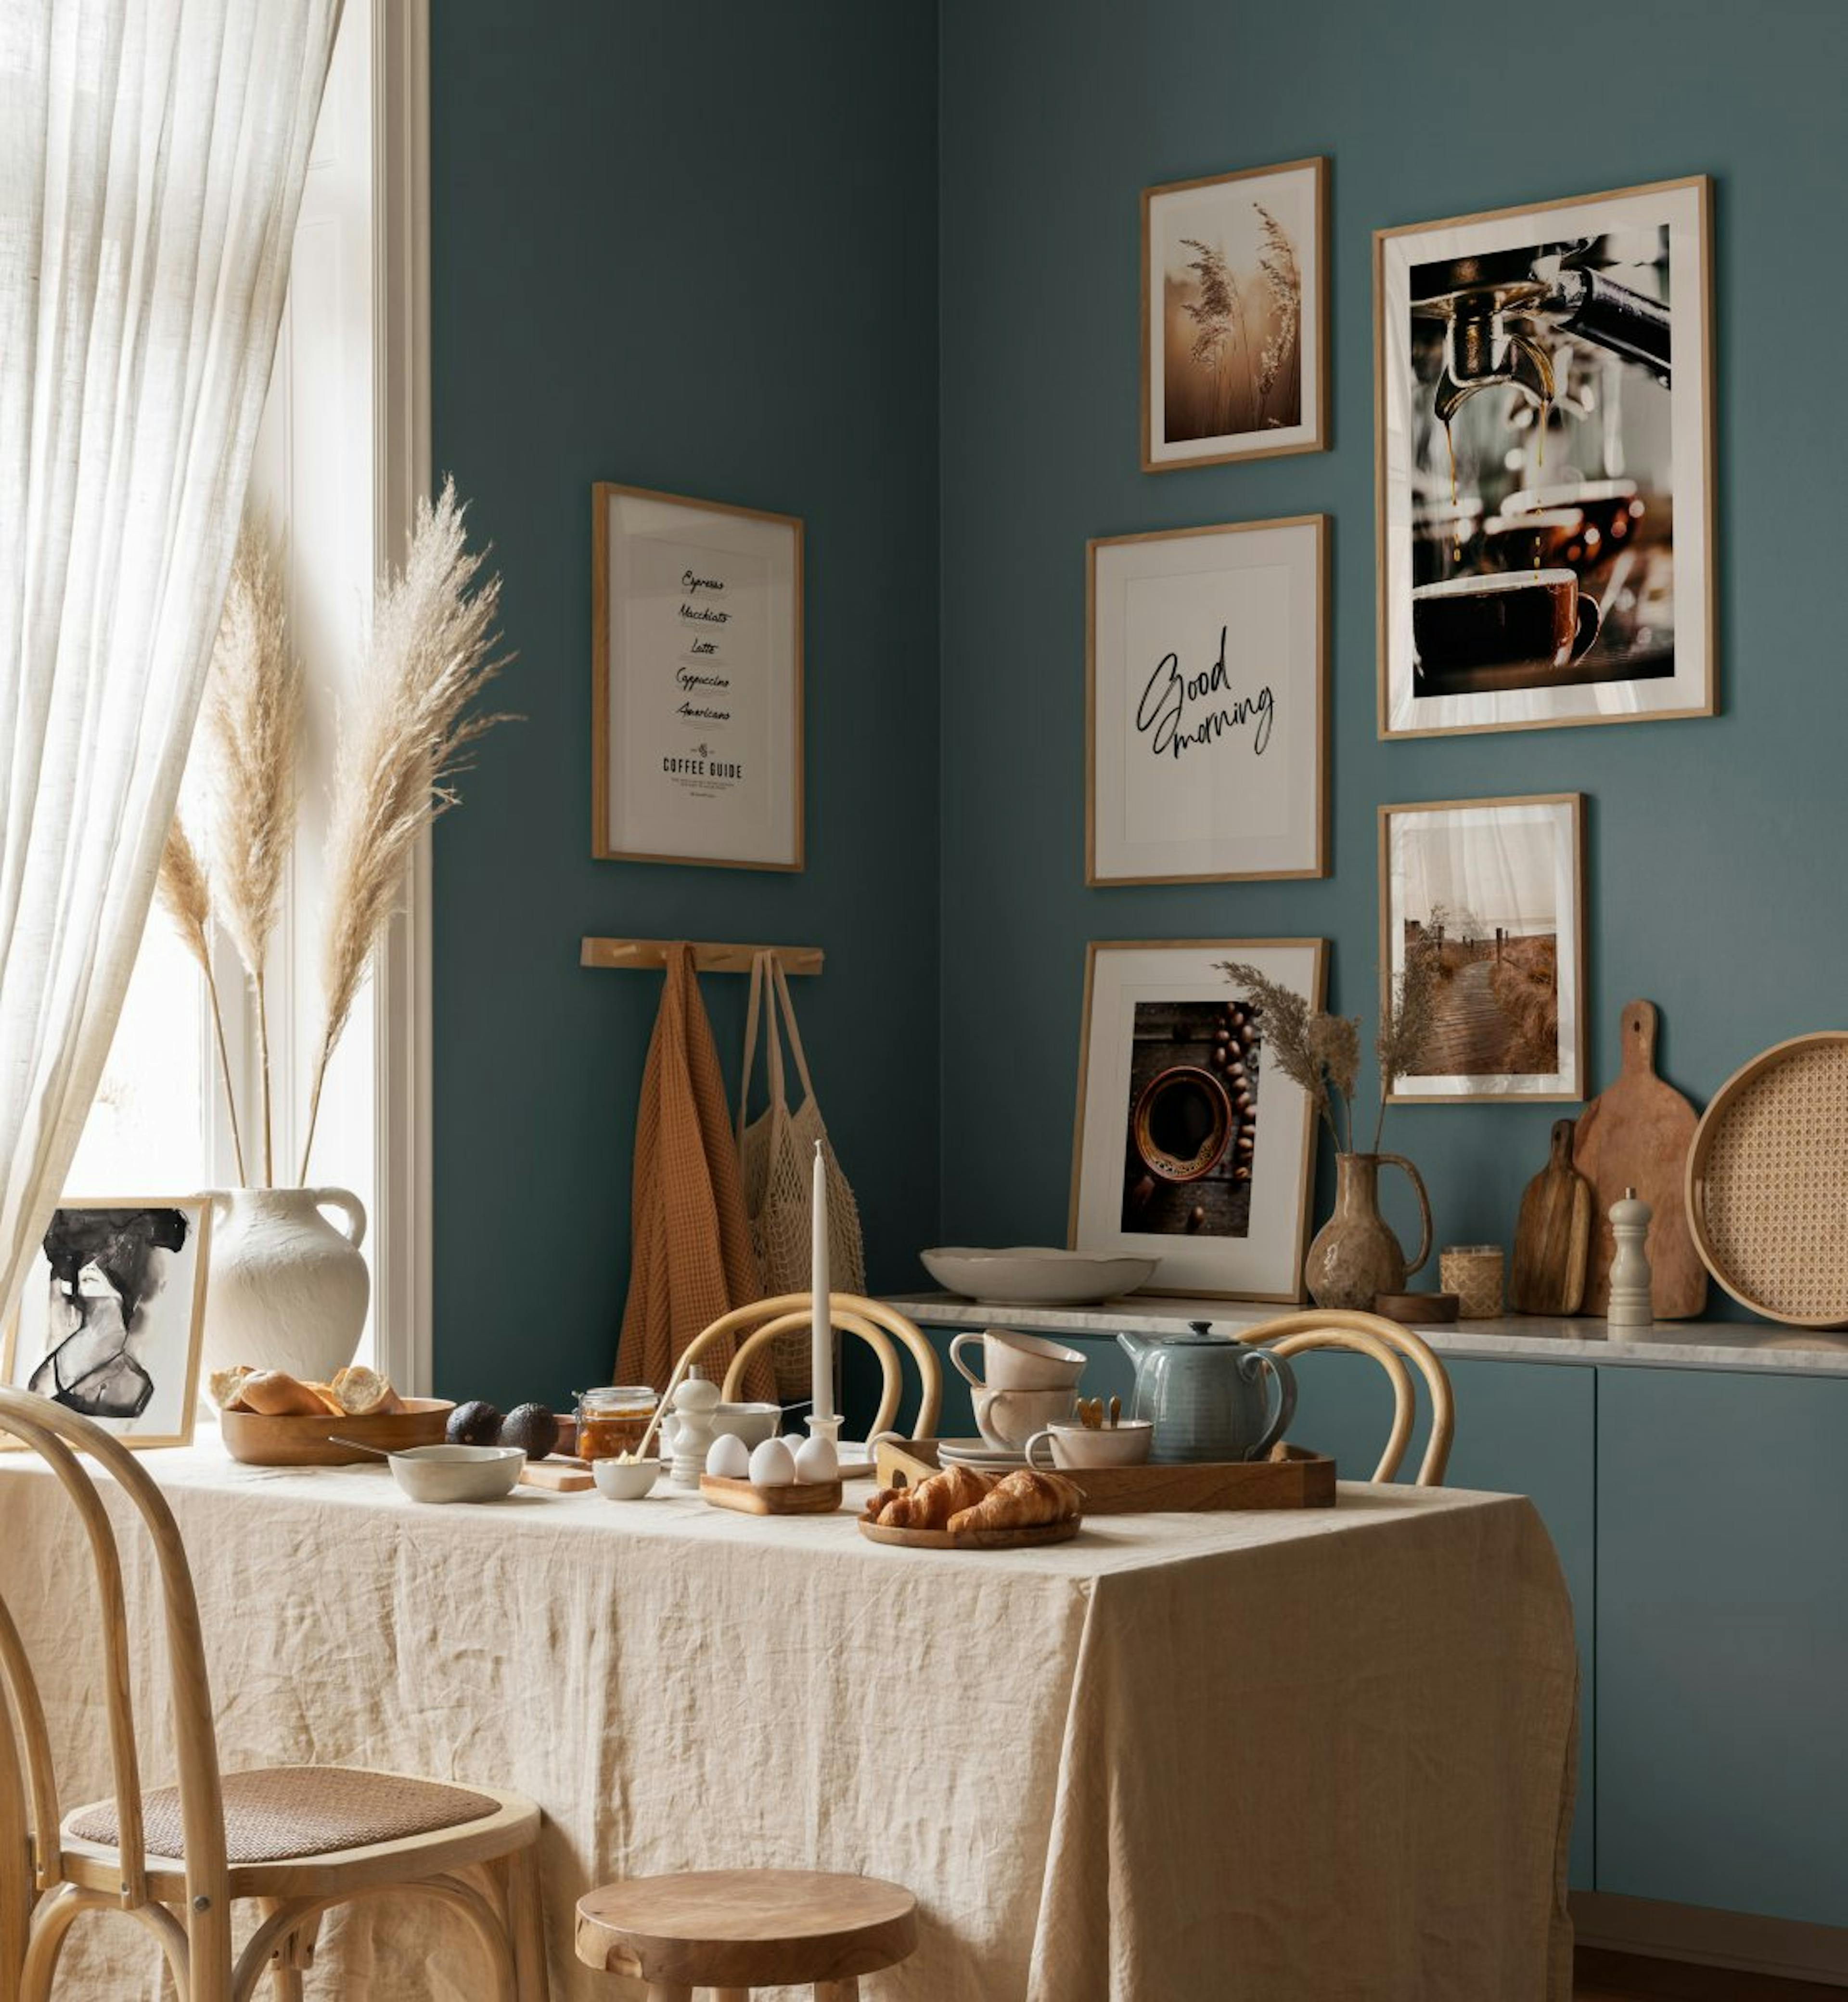 Kitchen art and photographs for a dining room